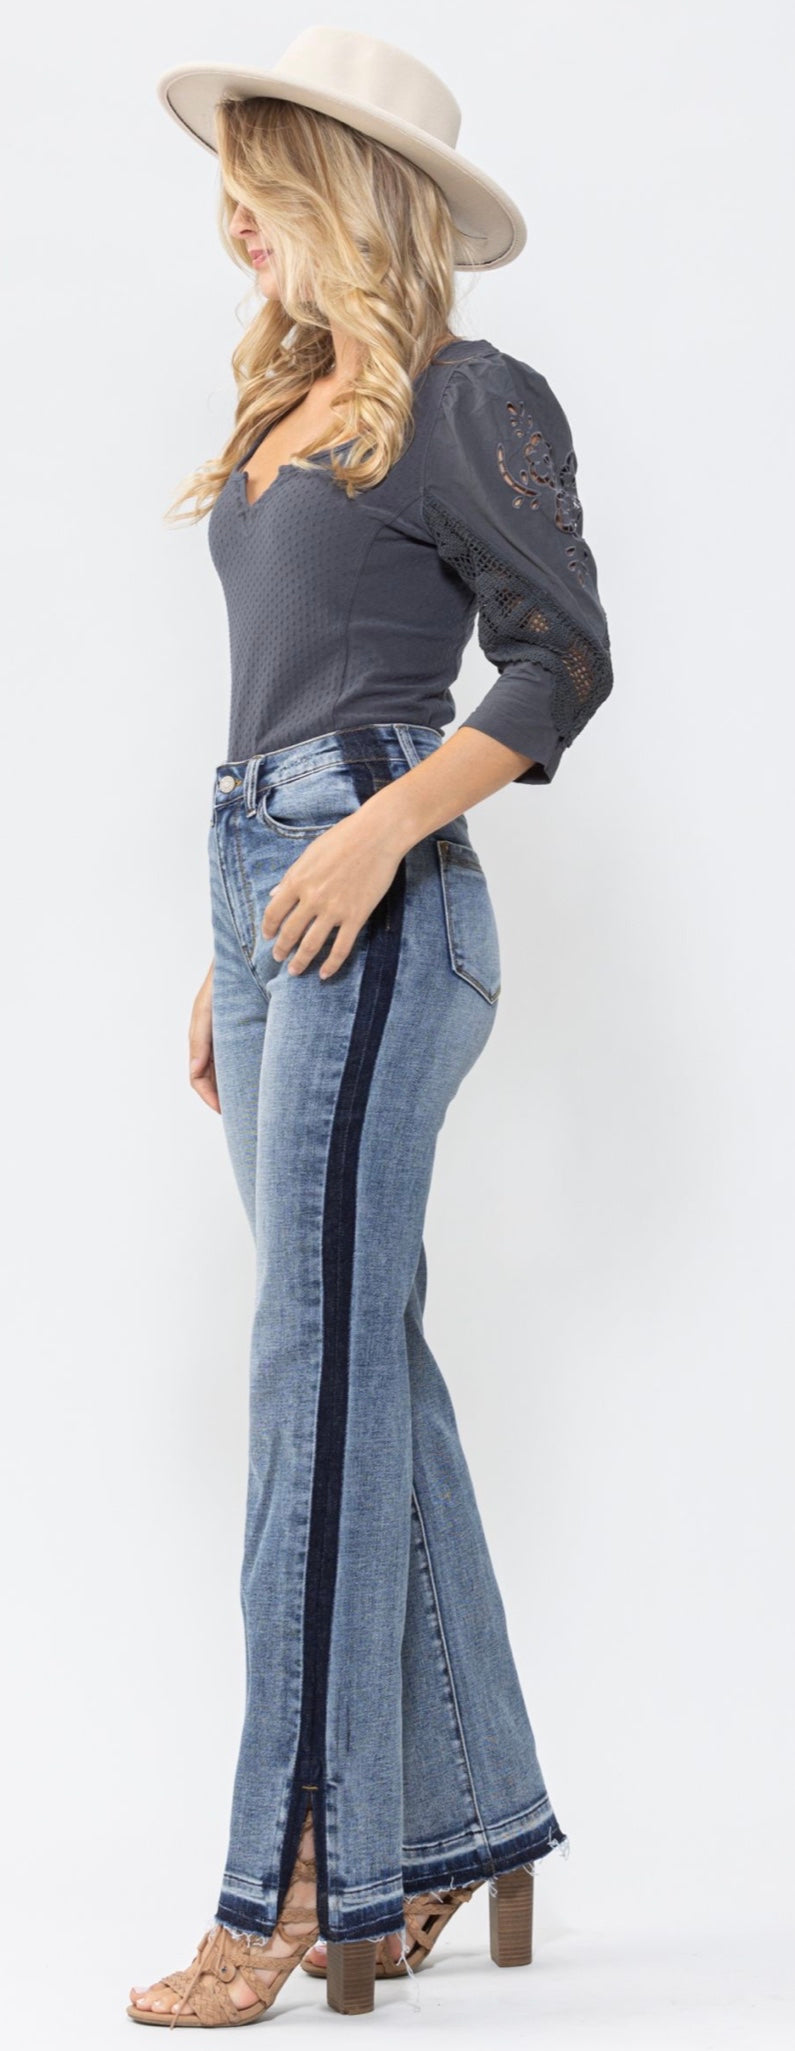 Judy Blue Rodeo Jeans